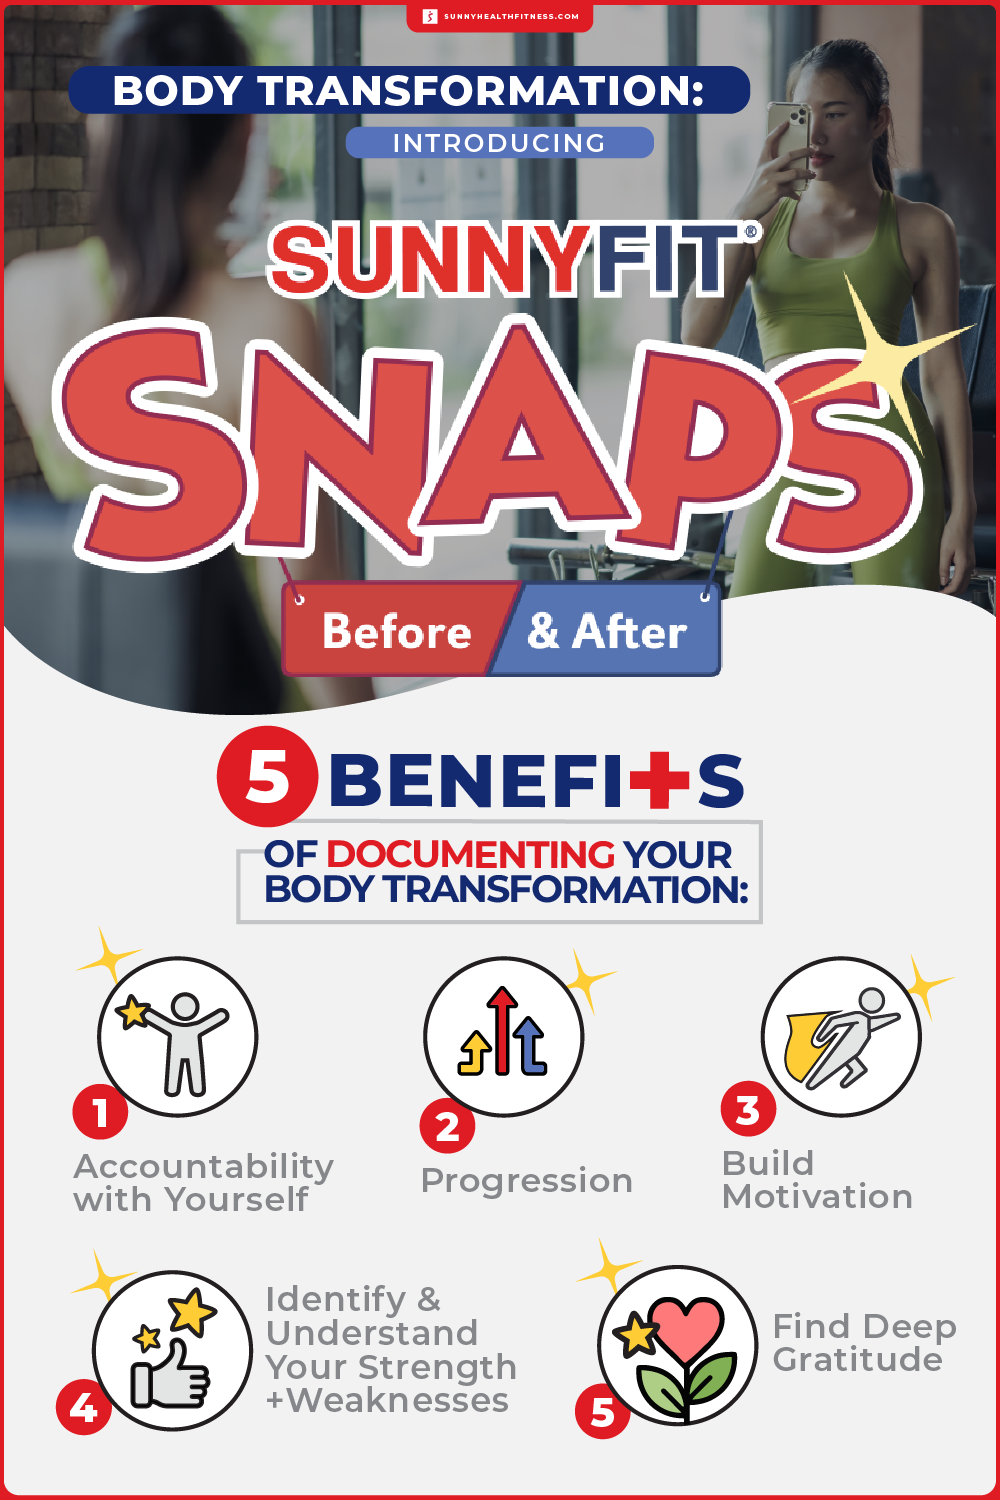 SunnyFit Snaps Infographic